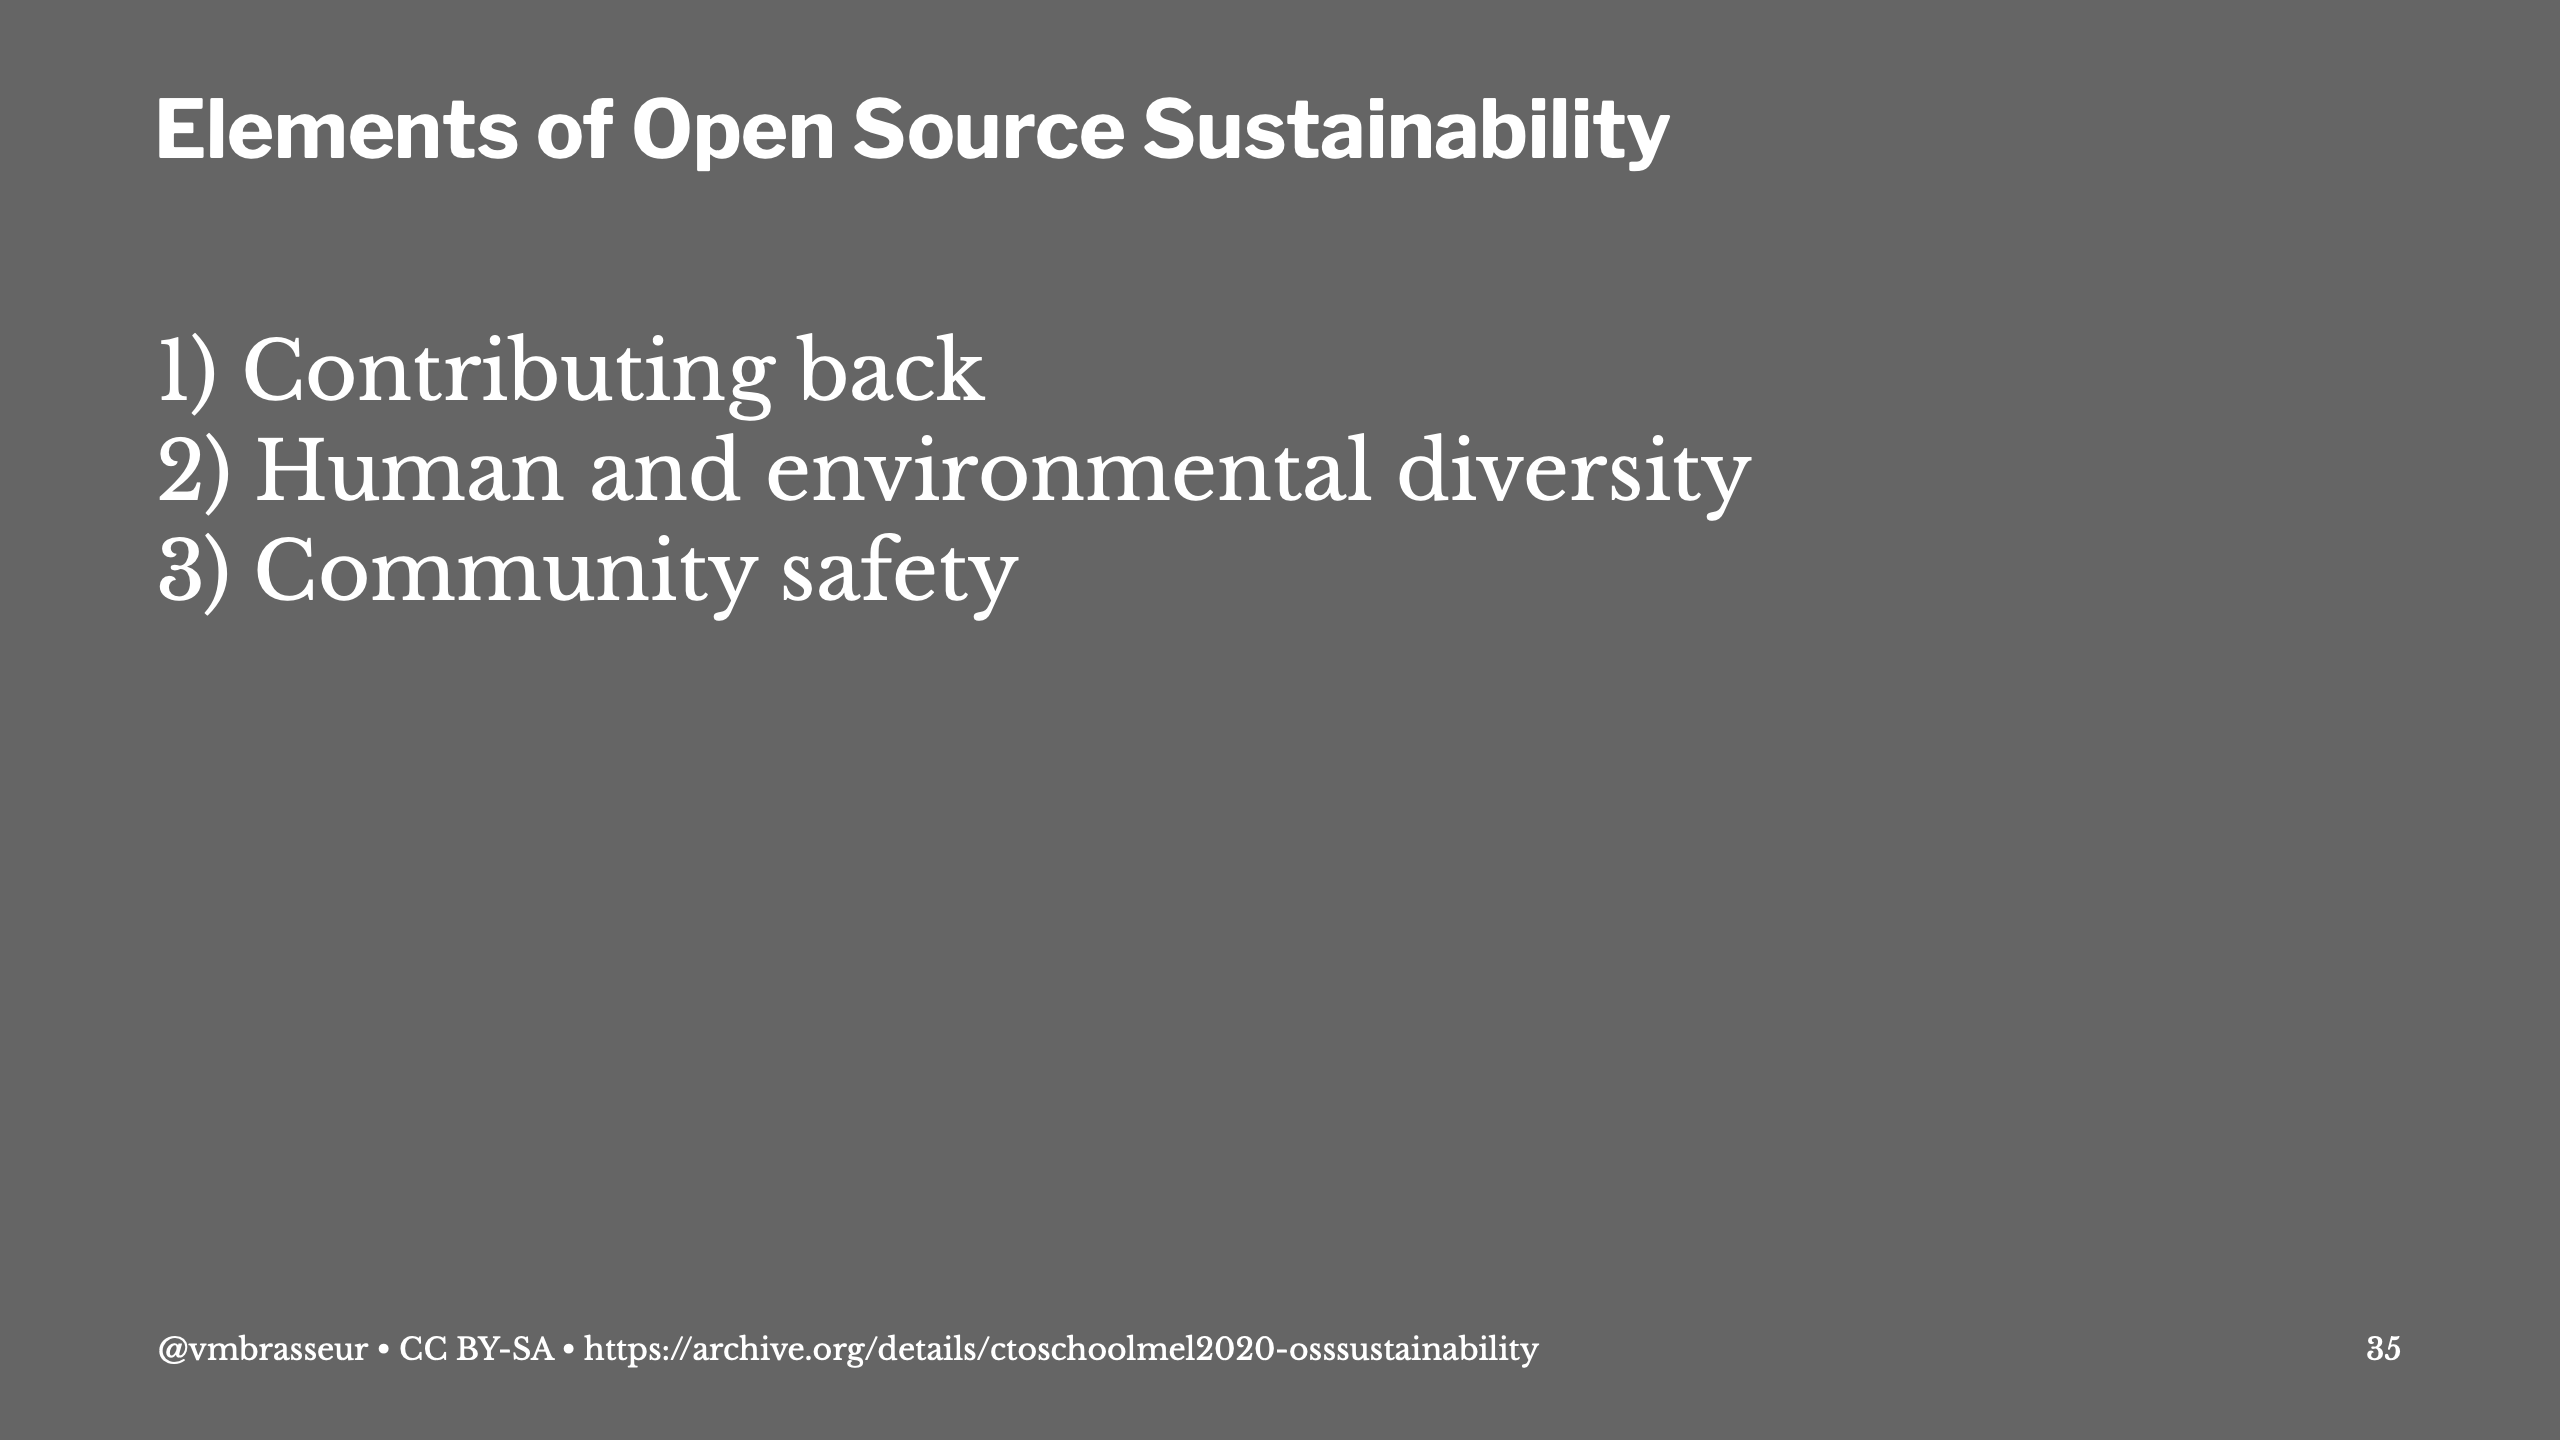 Elements of Open Source Sustainability: Contributing back, Human and environmental diversity, and Community safety